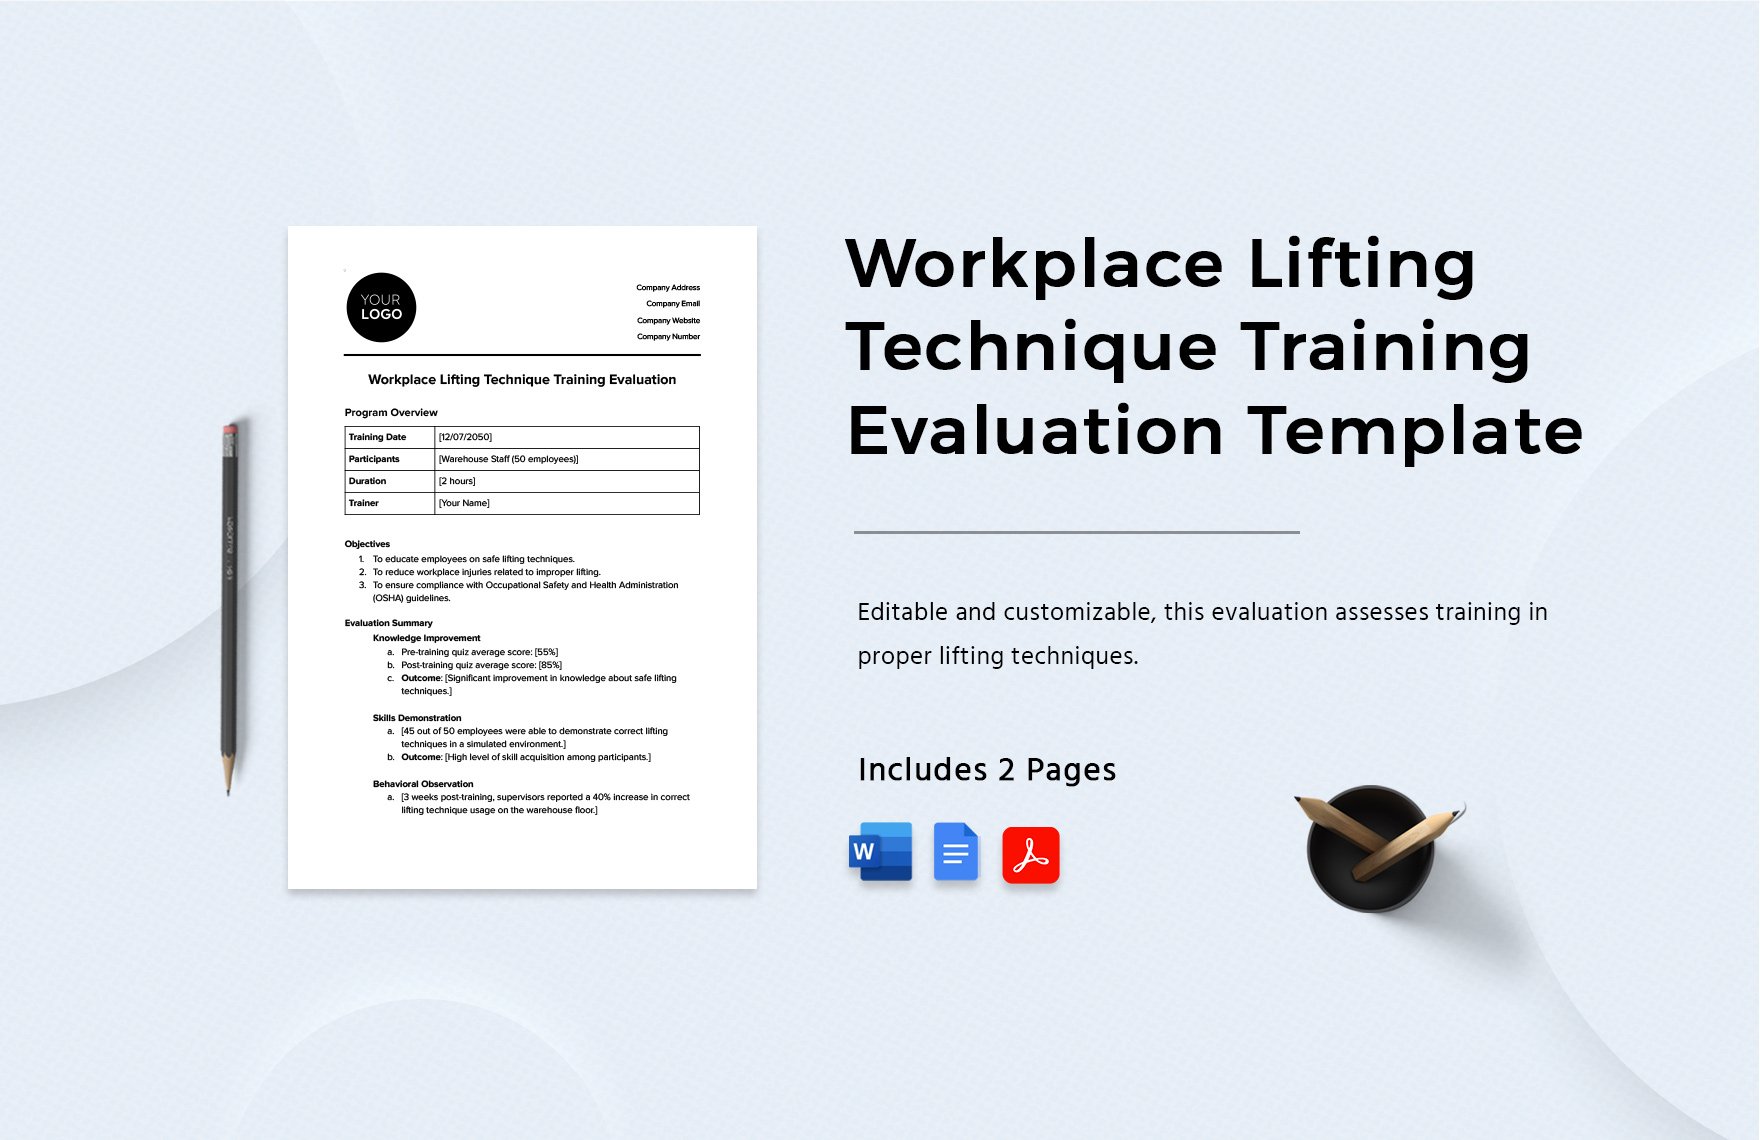 Workplace Lifting Technique Training Evaluation Template